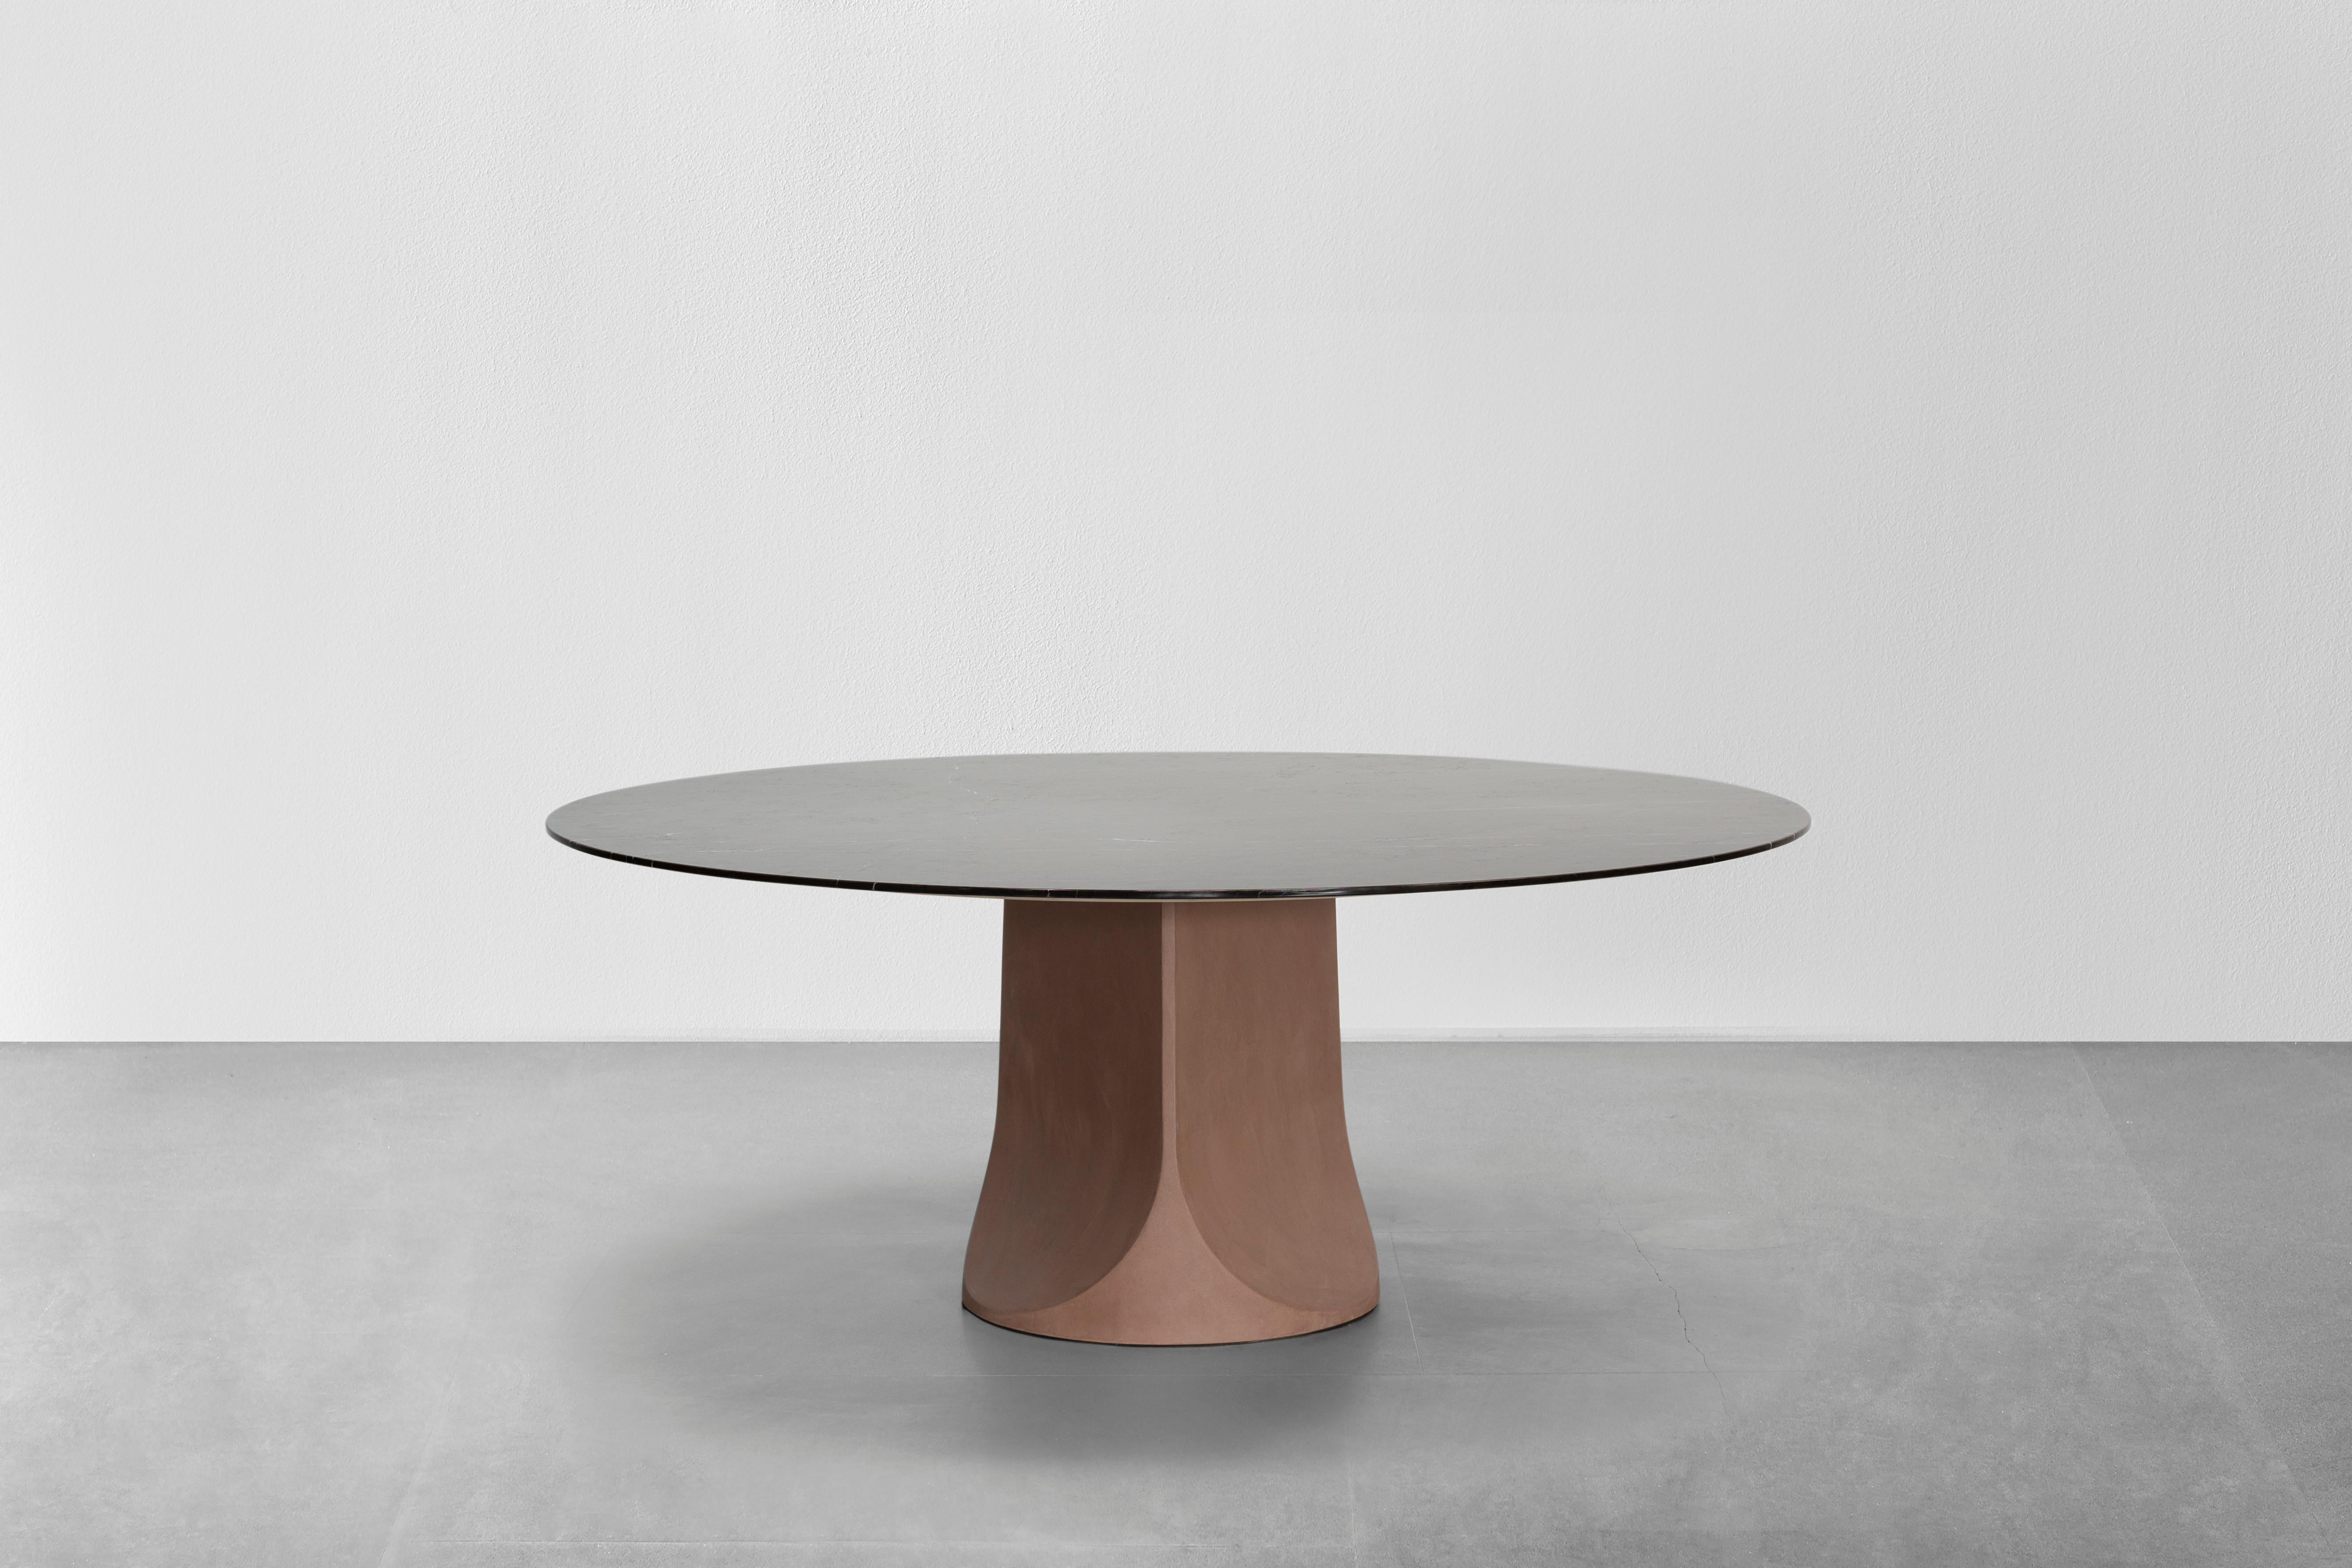 A totem that transforms any room into a temple of conviviality. With Togrul, designer Gordon Guillaumier goes beyond the limits of matter to create a table suitable for homes and contract spaces alike. Available in different sizes, the bases in